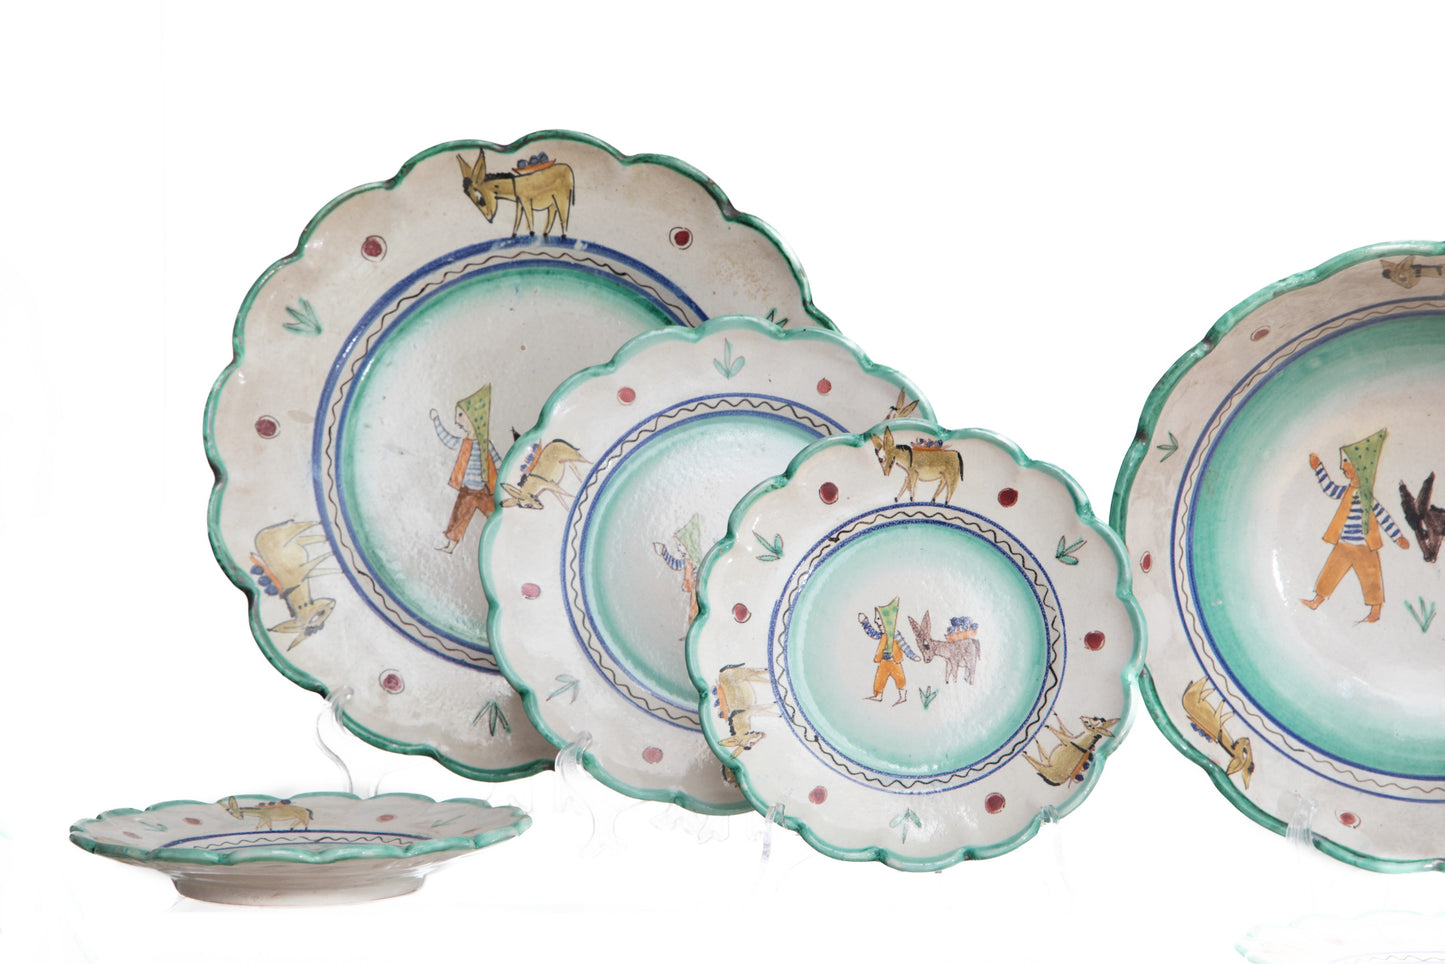 Vietri ceramic plate set from the 1950s by Vincenzo Pinto